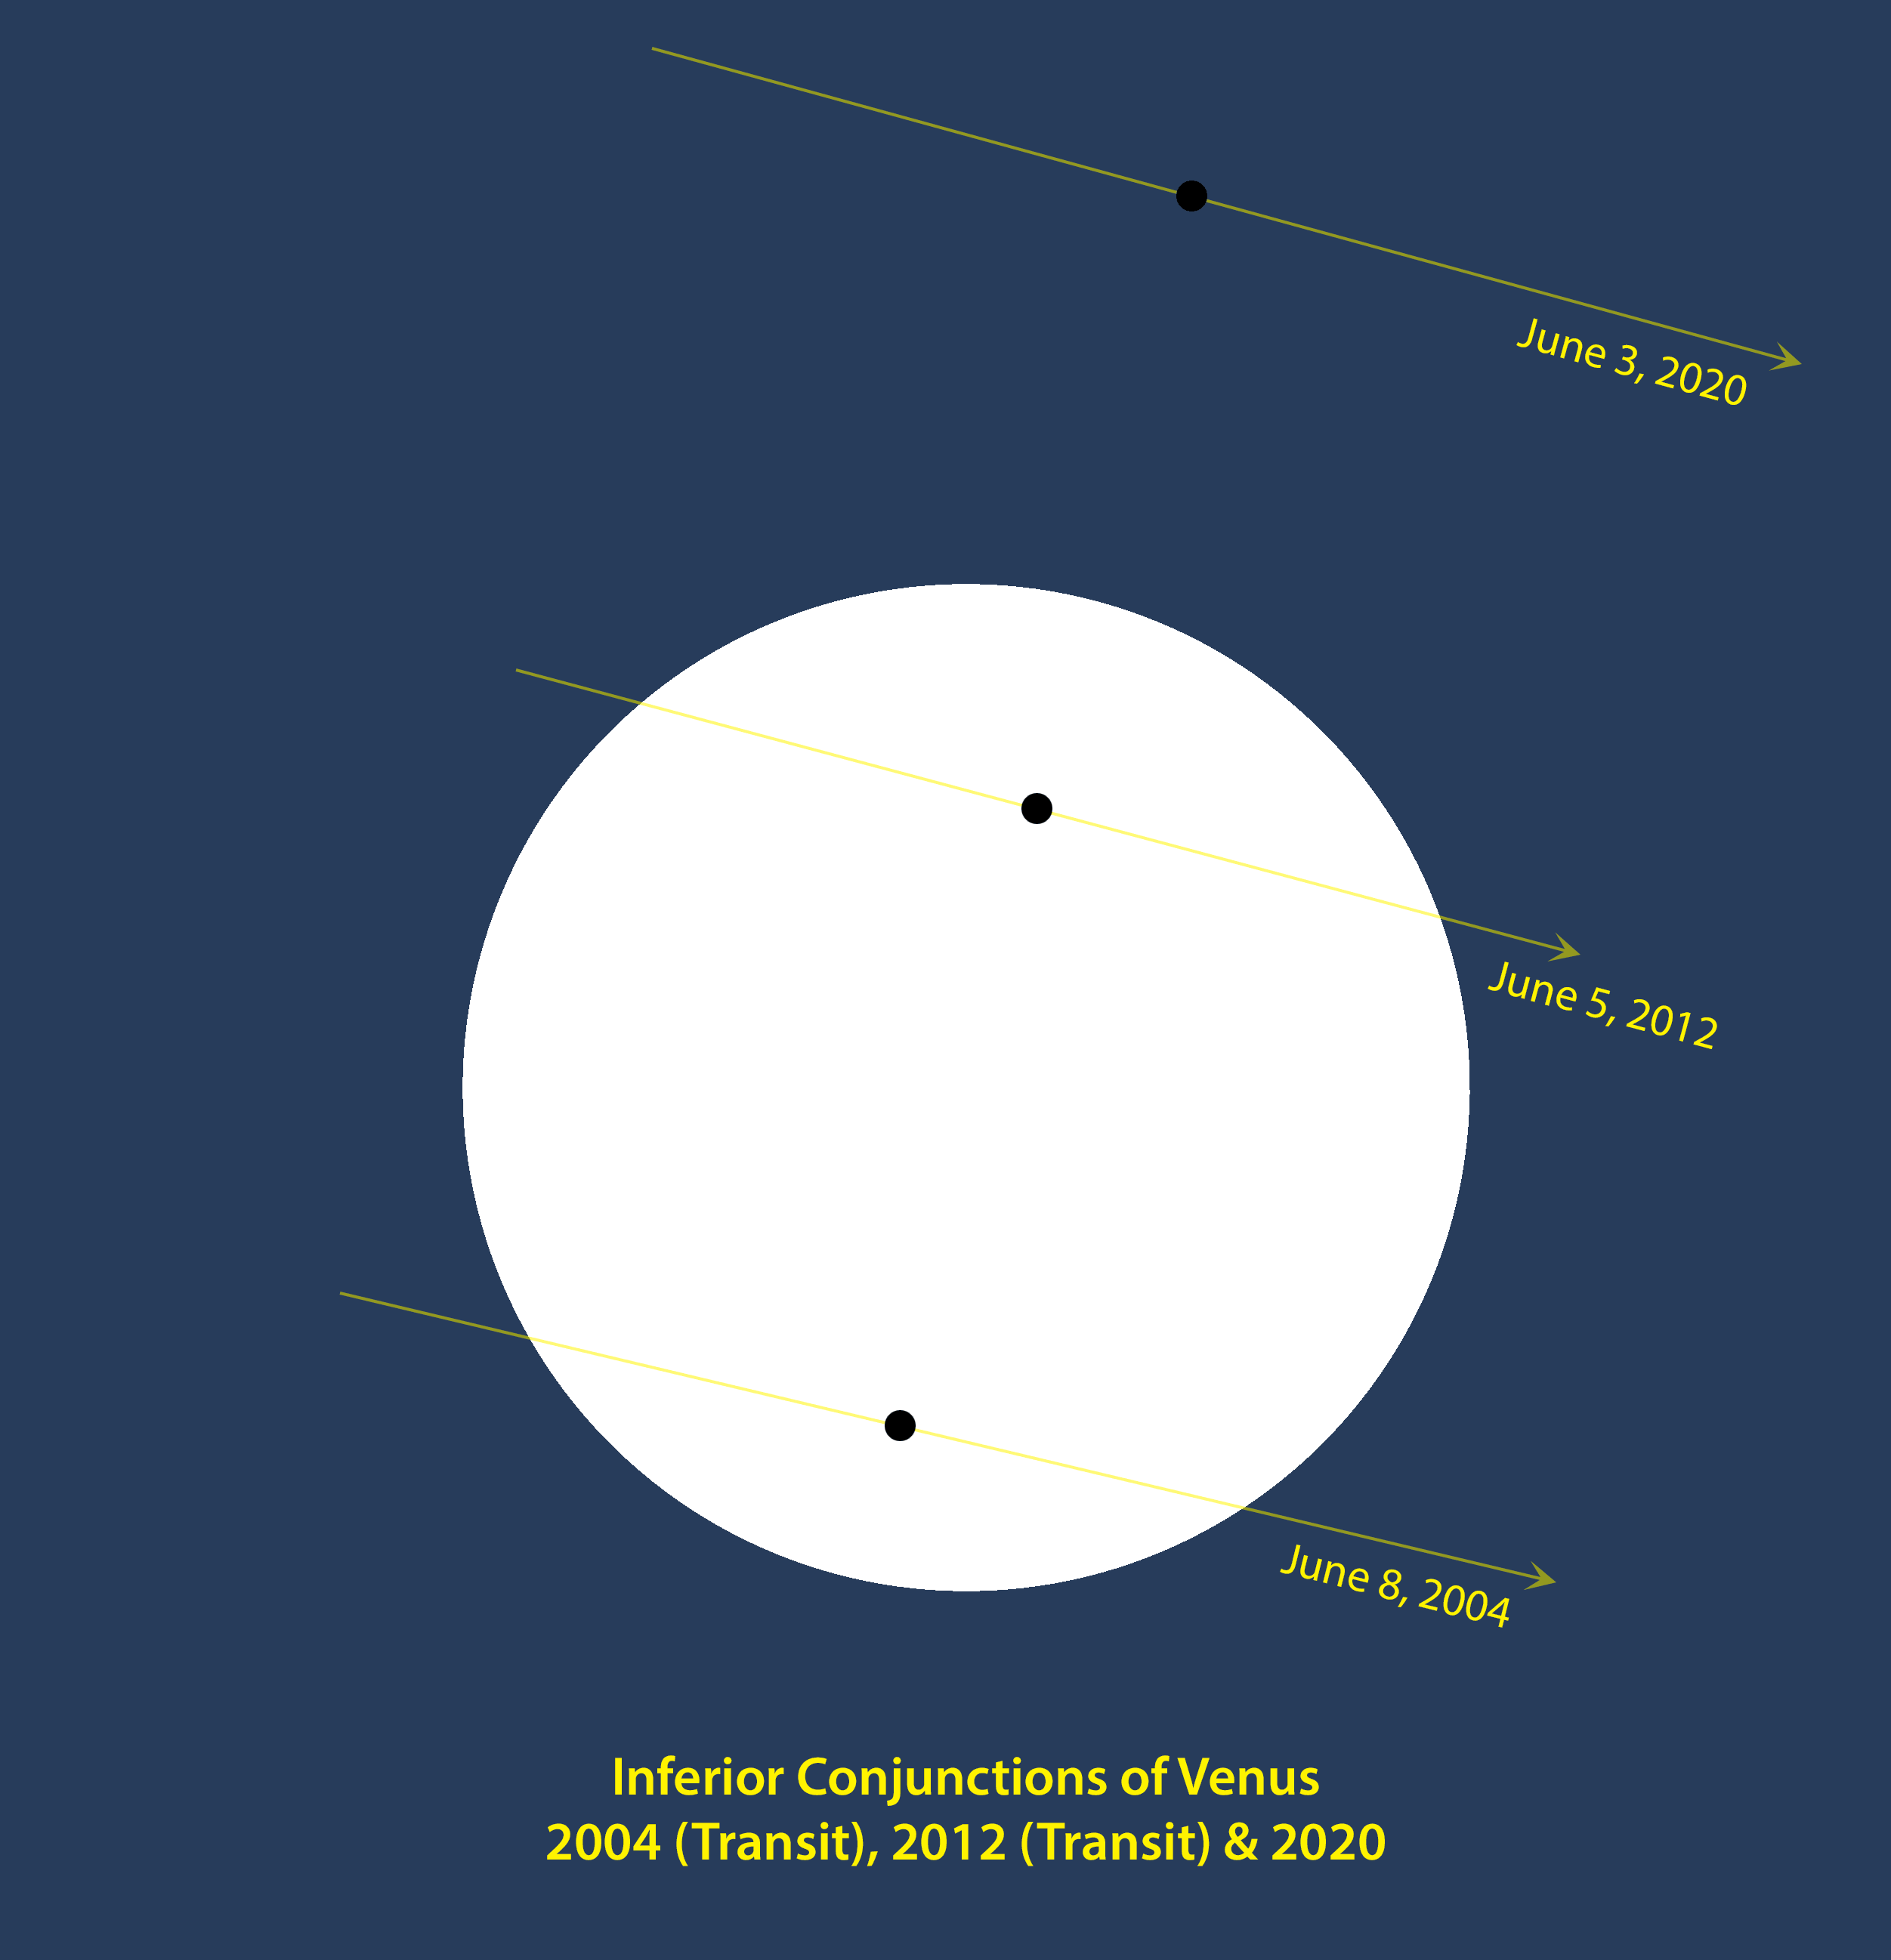 Chart showing inferior conjunctions of Venus in 2004 (transit), 2012 (transit) and 2020